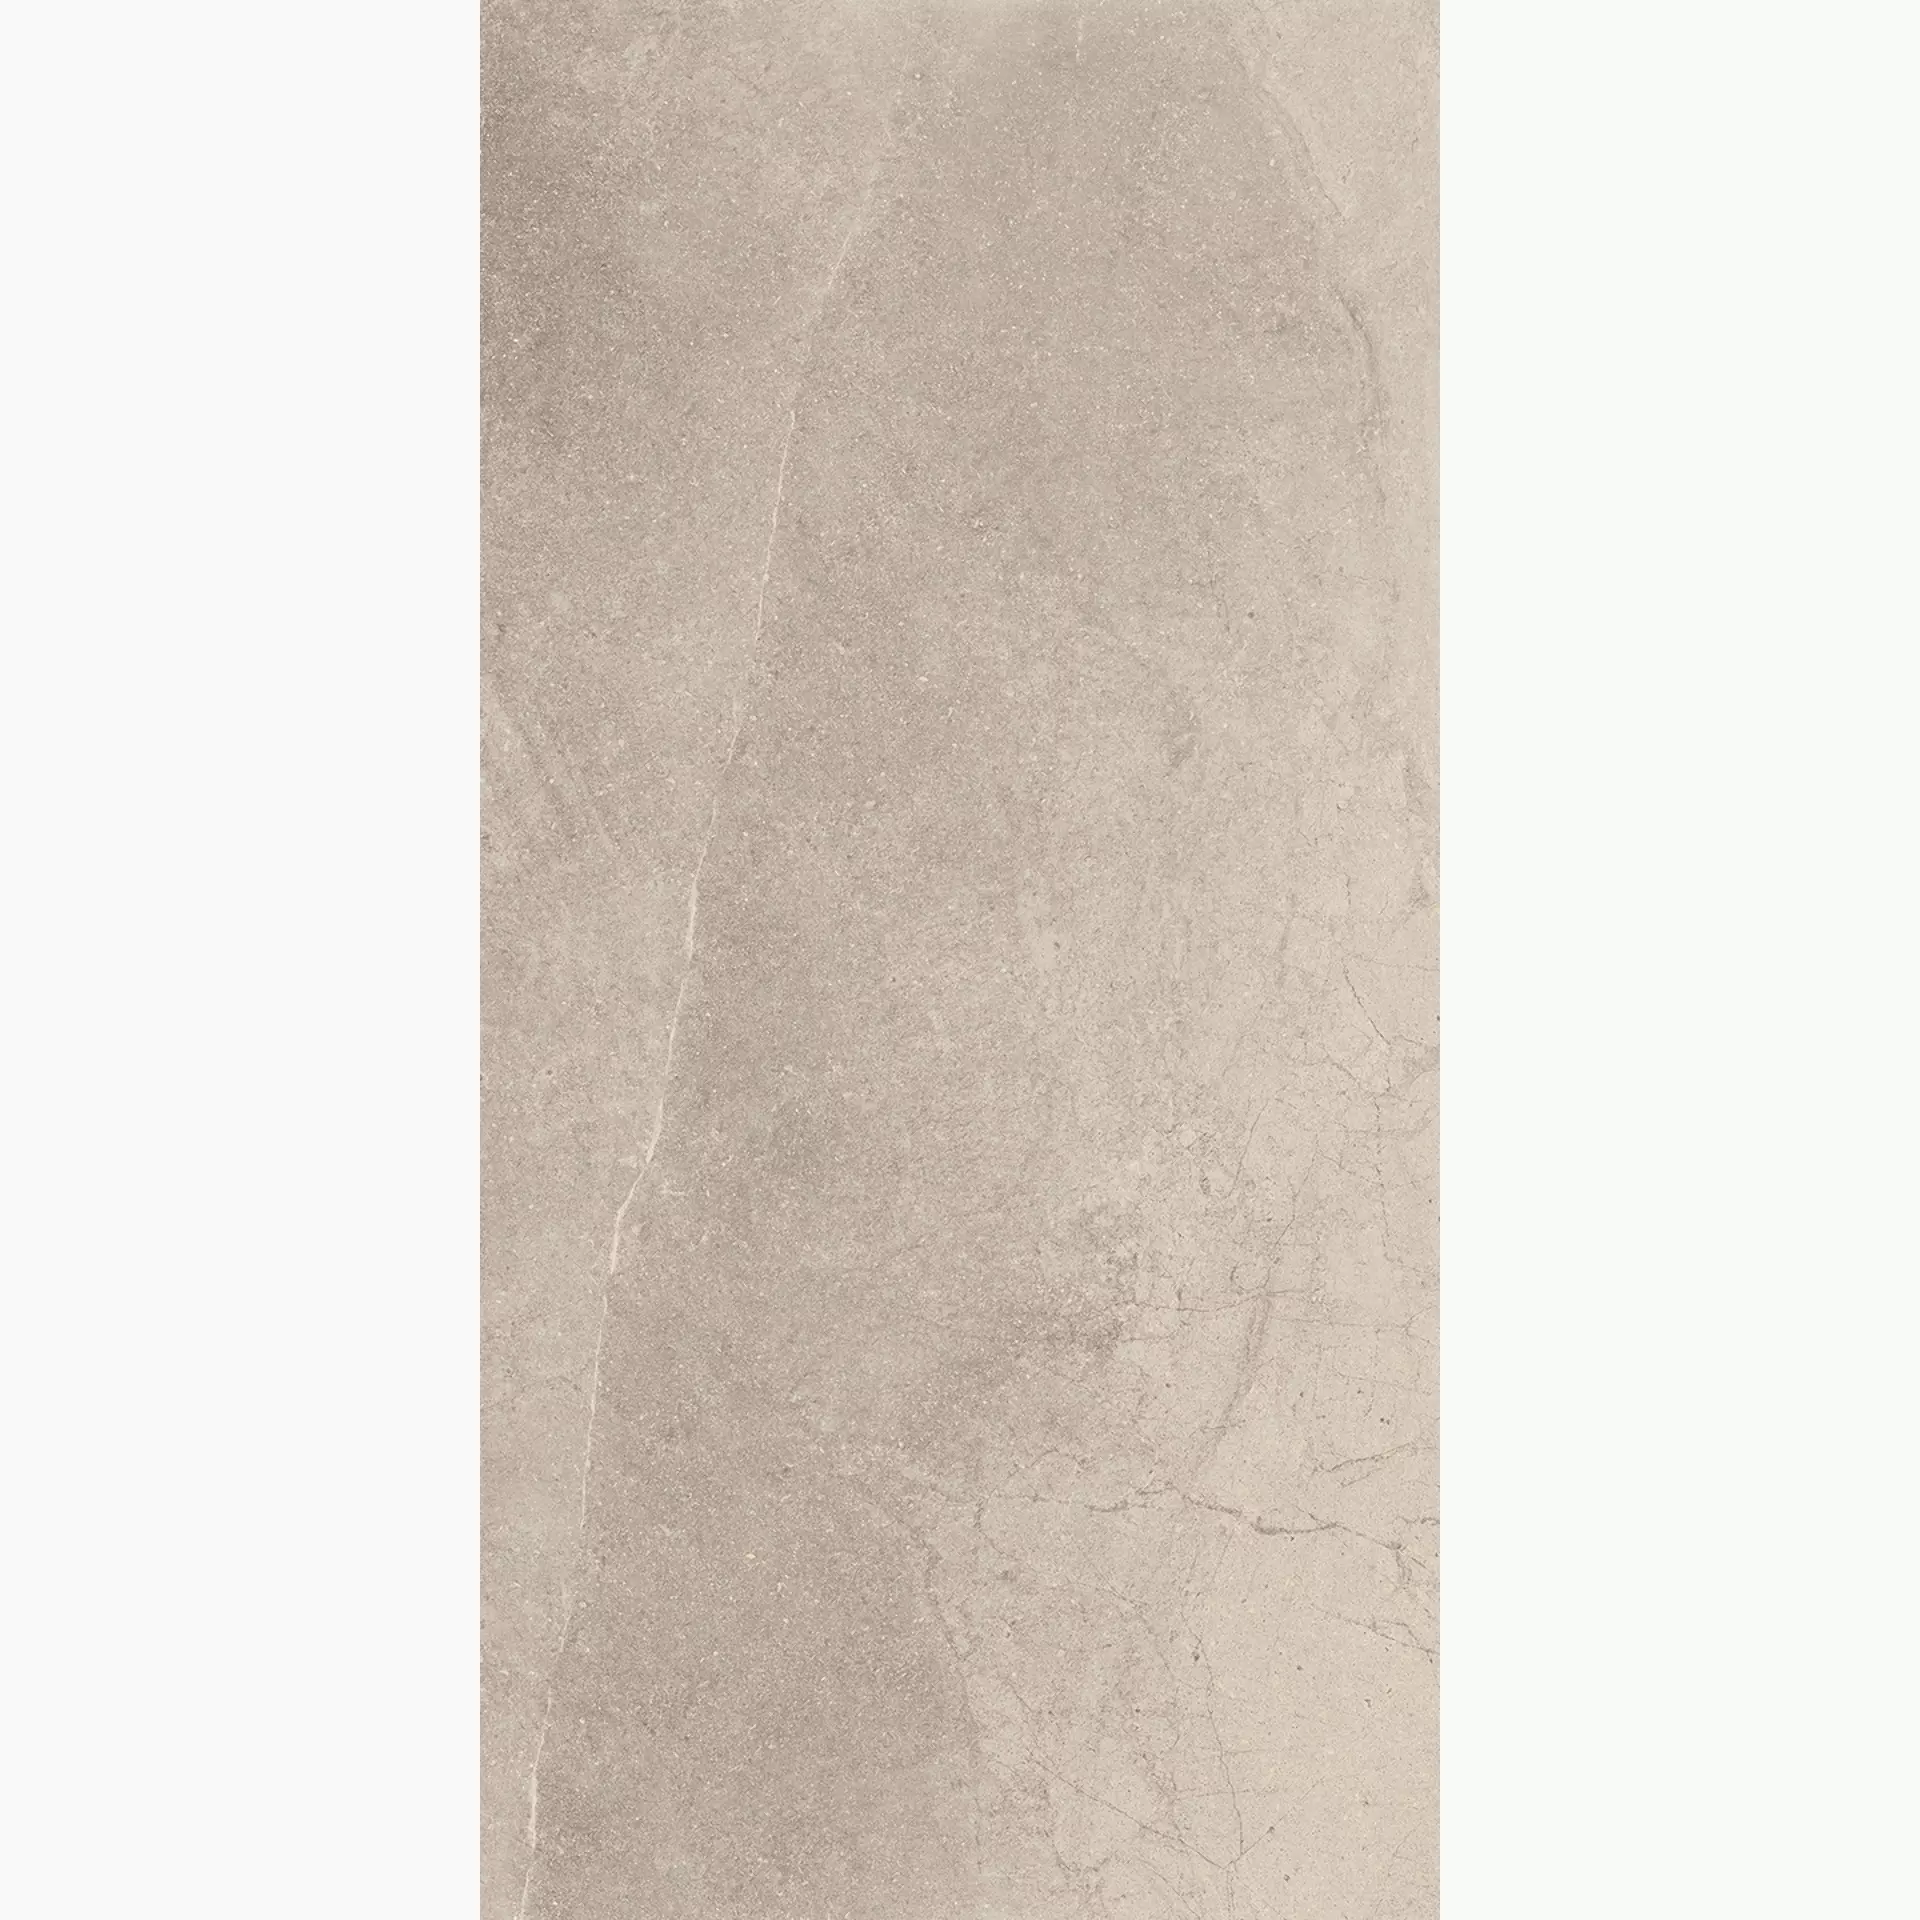 Fondovalle Planeto Moon Natural PNT268 60x120cm rectified 8,5mm